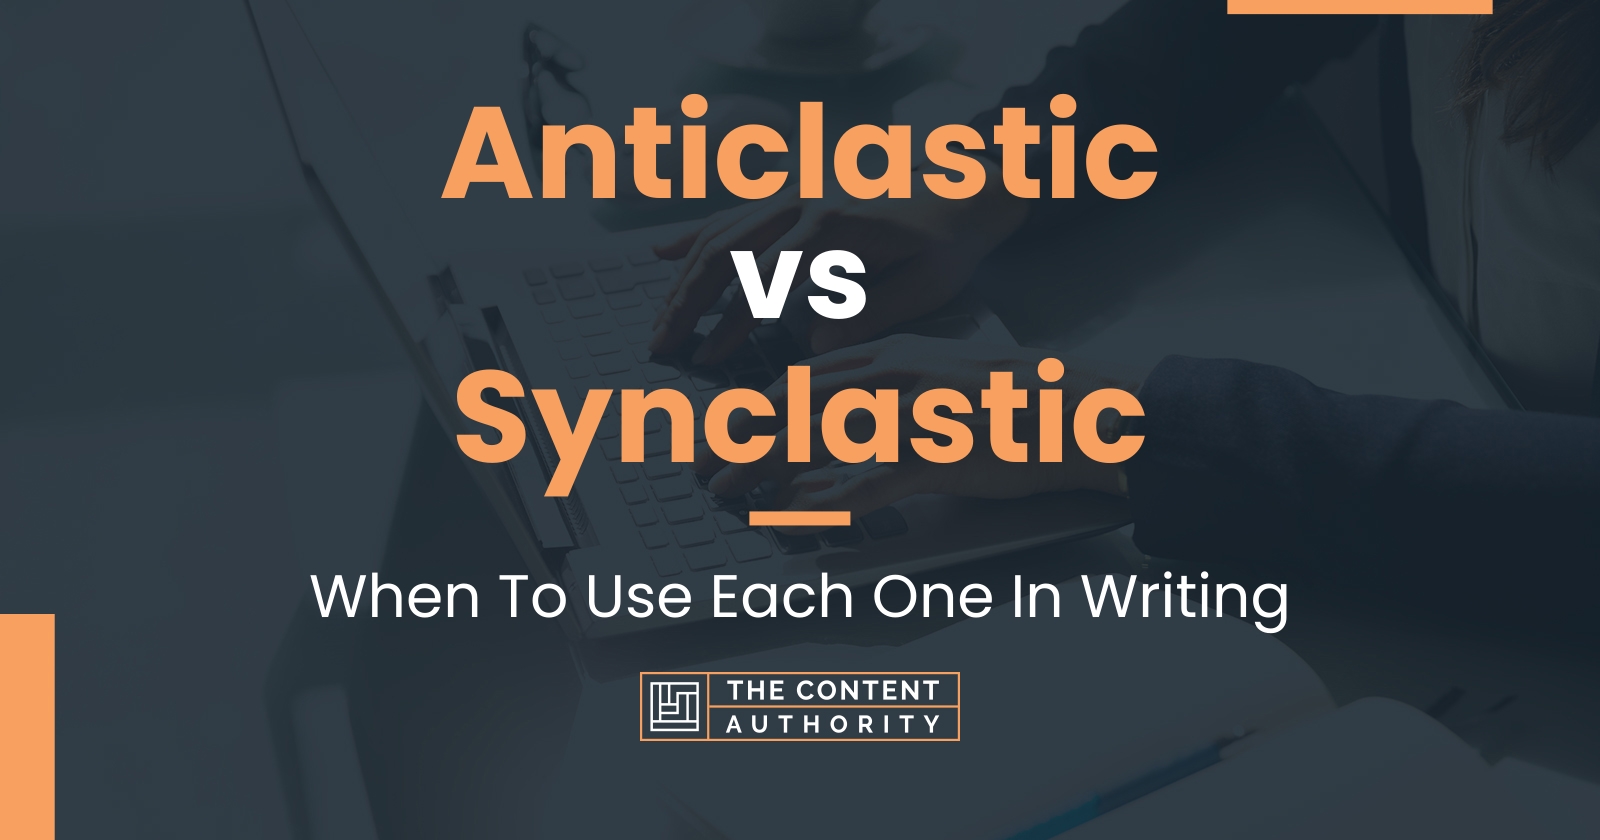 Anticlastic vs Synclastic: When To Use Each One In Writing